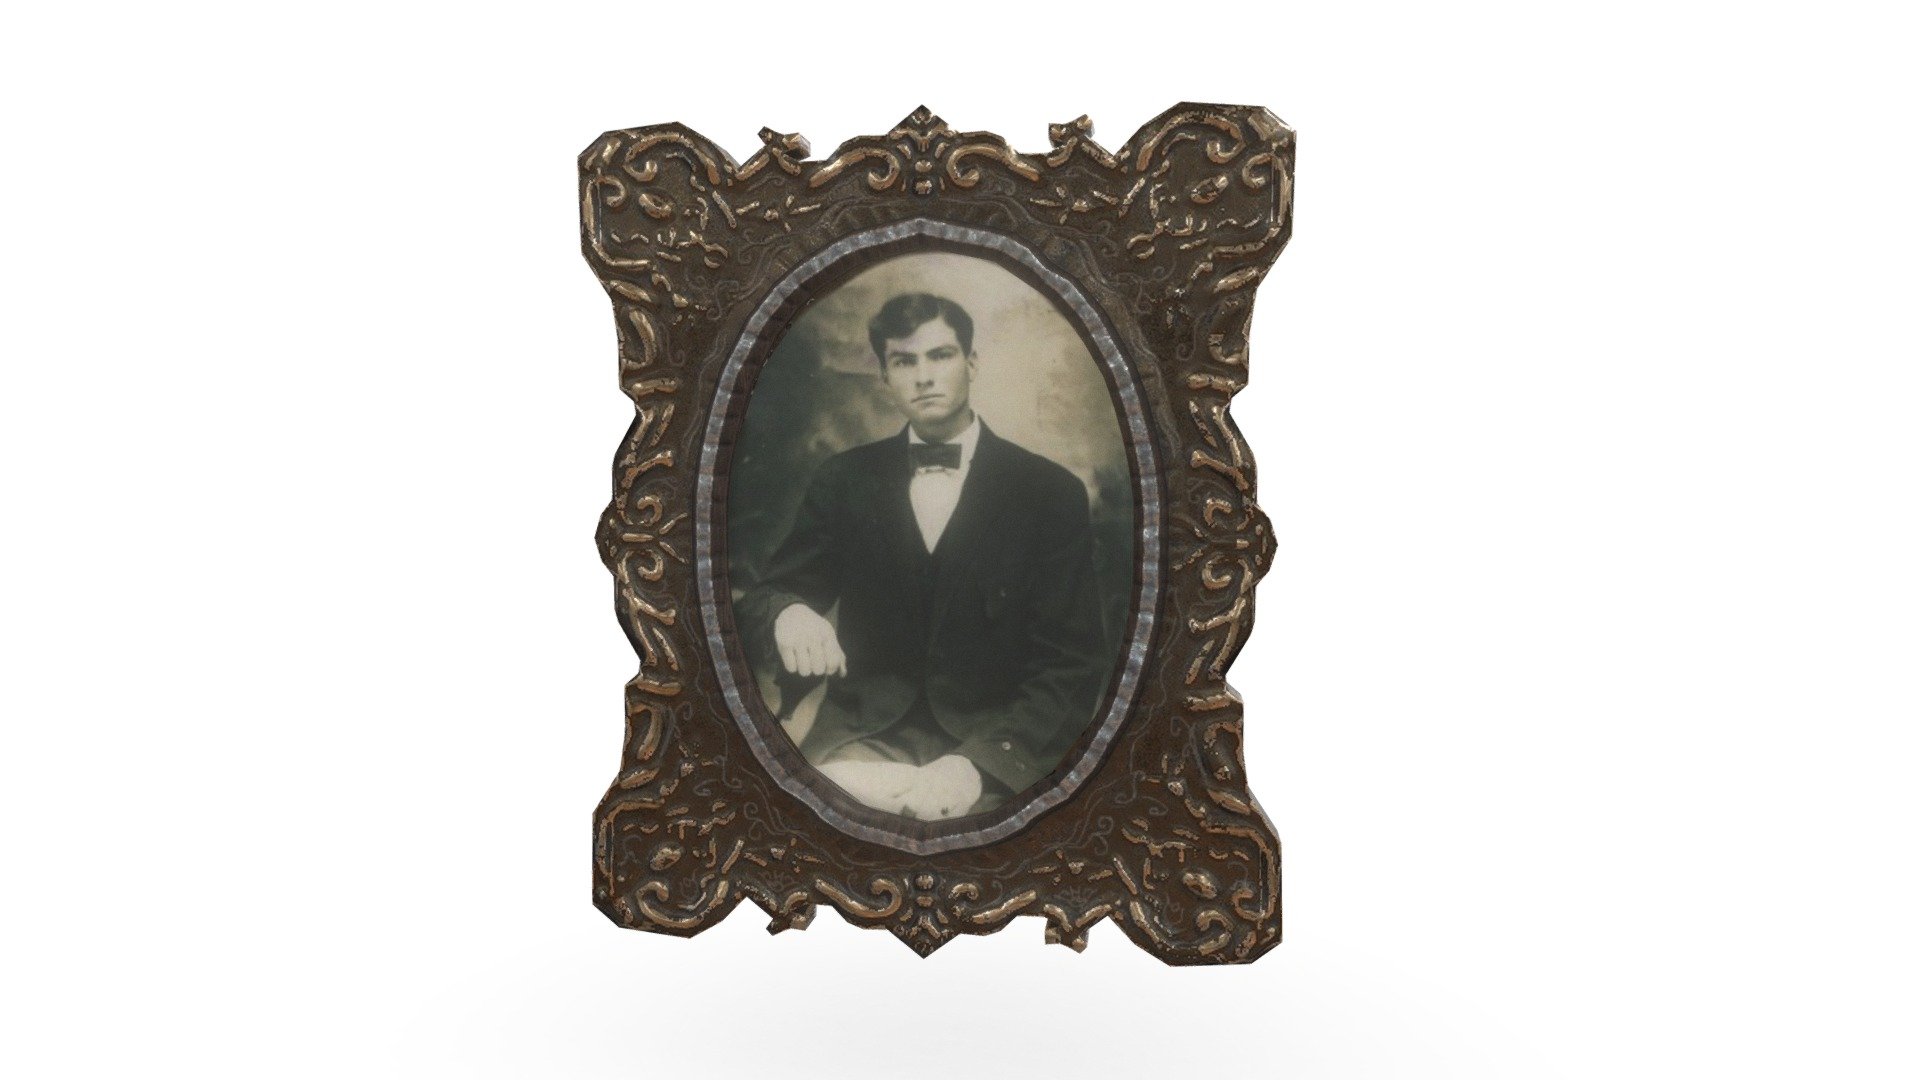 Free Victorian Square Picture Frame, Feel free to use this within your projects!
Made for a University Project 3d model